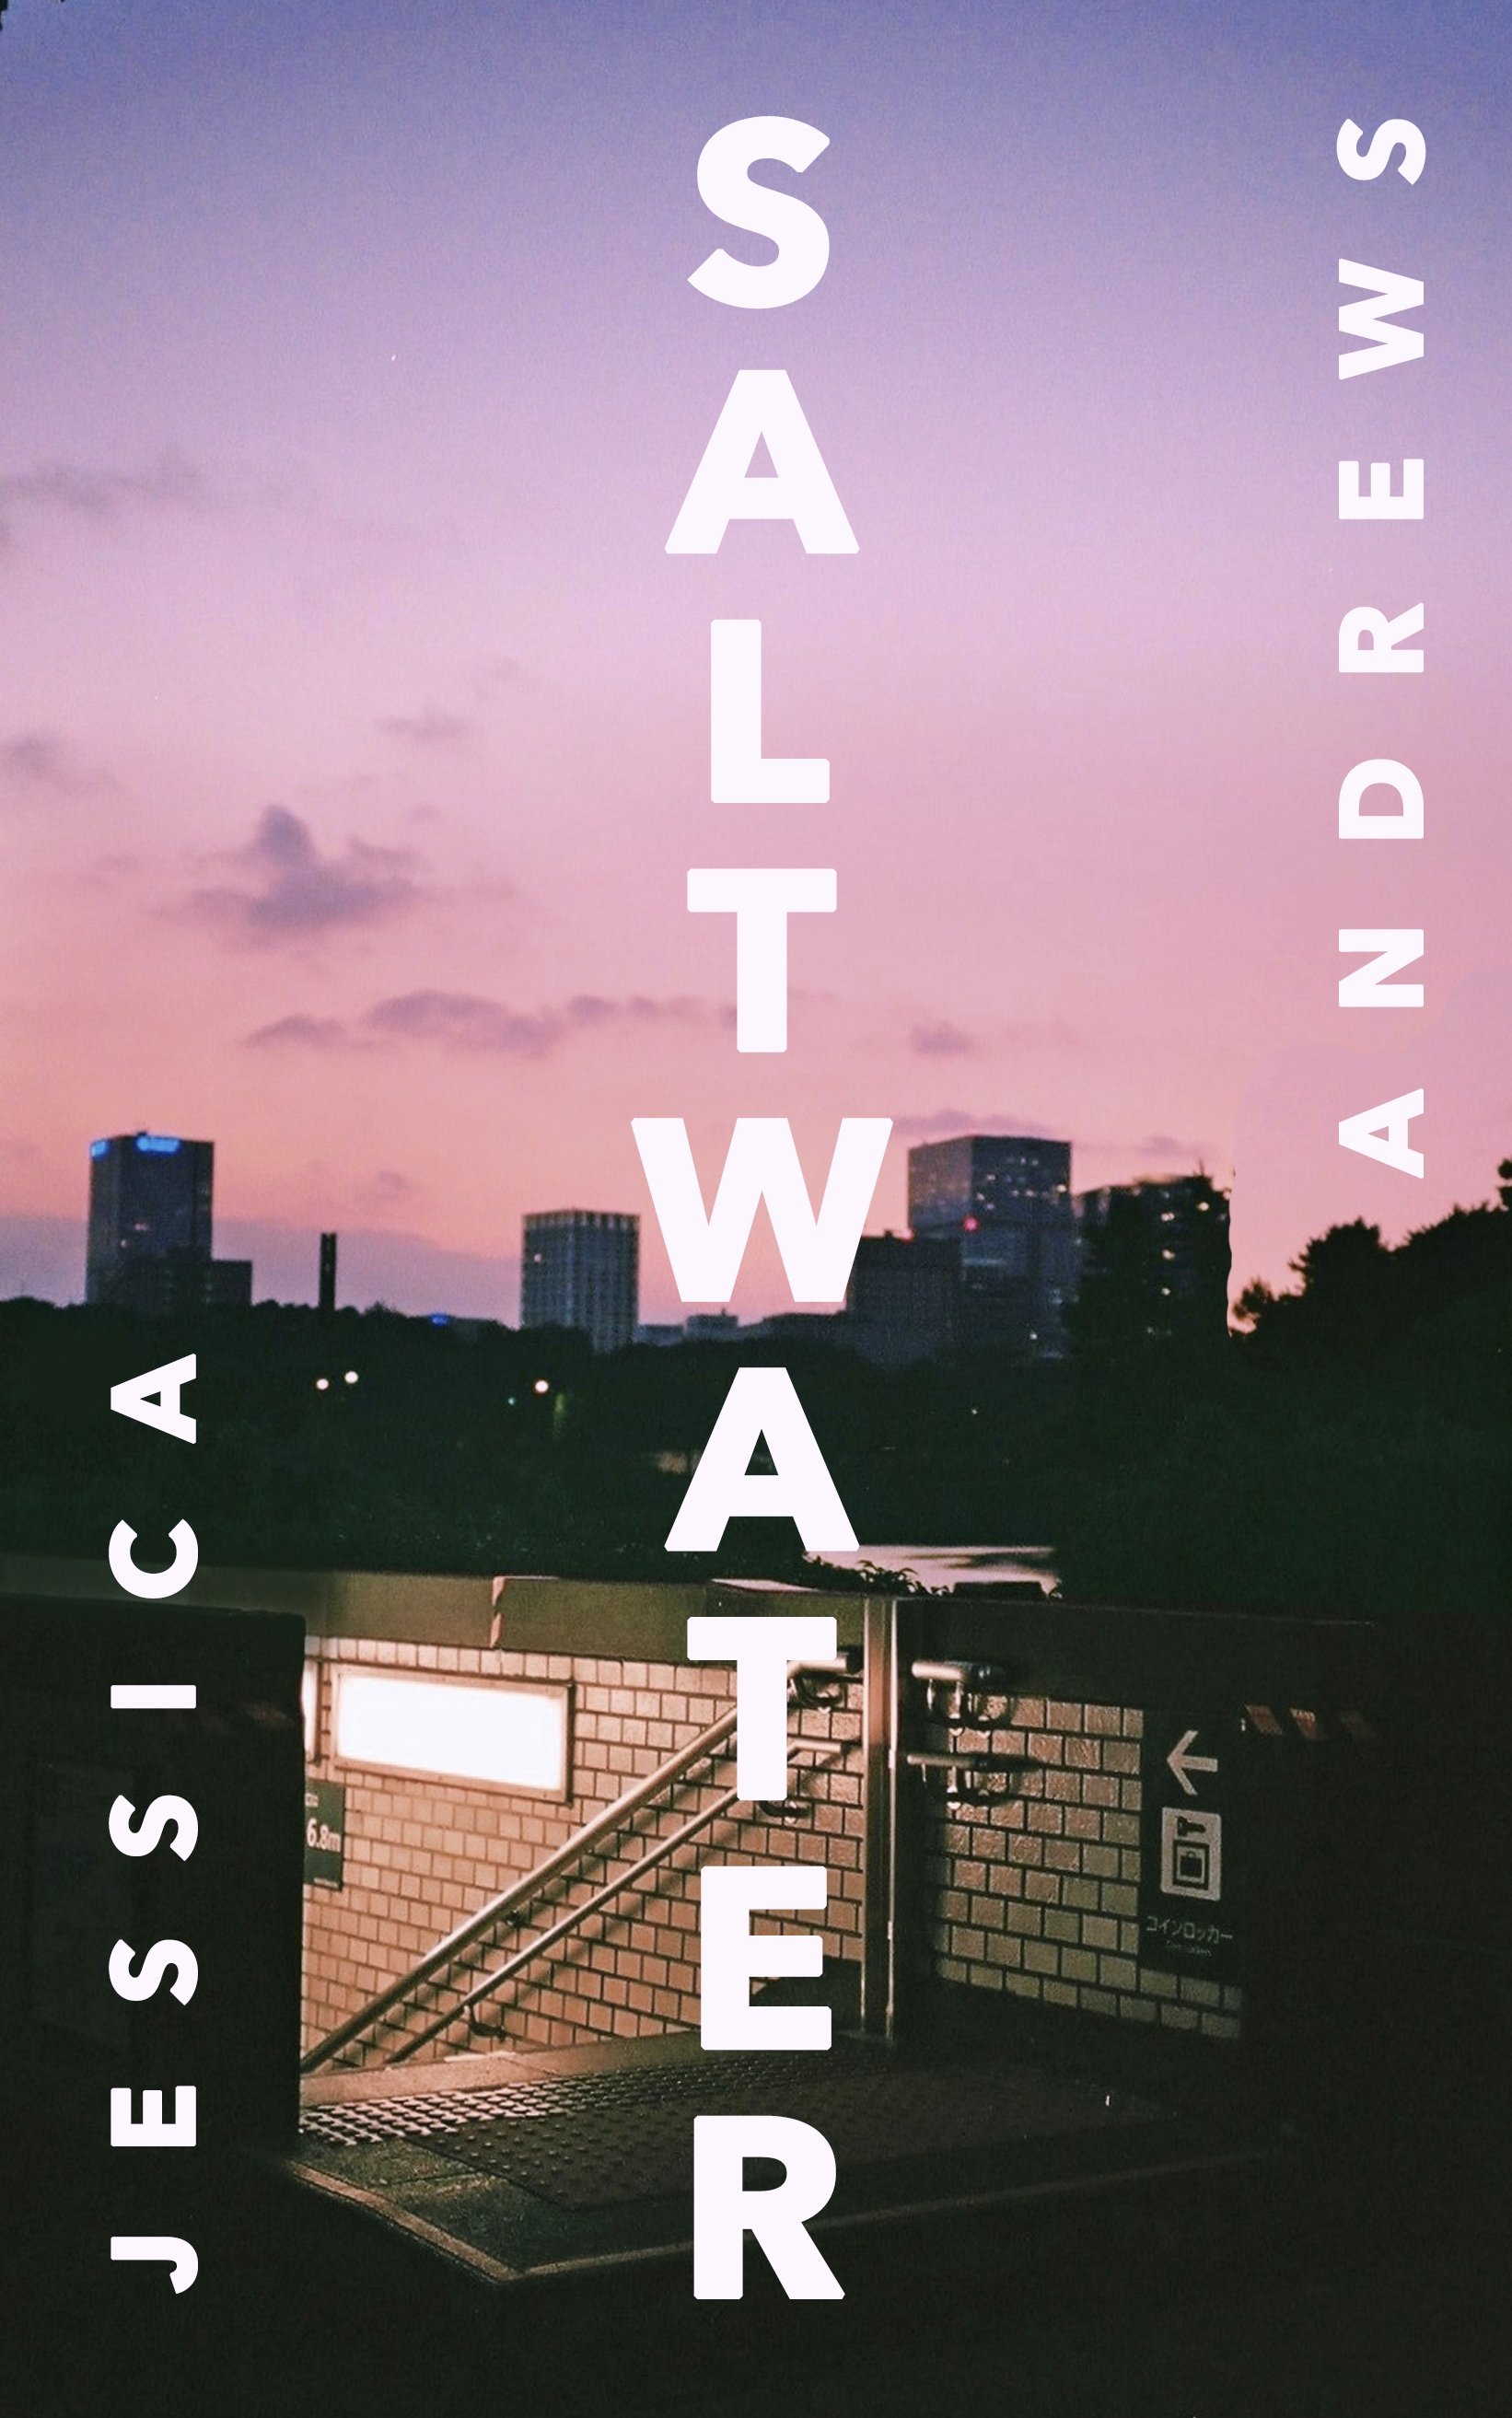 Books on the shortlist include Saltwater by Jessica Andrews